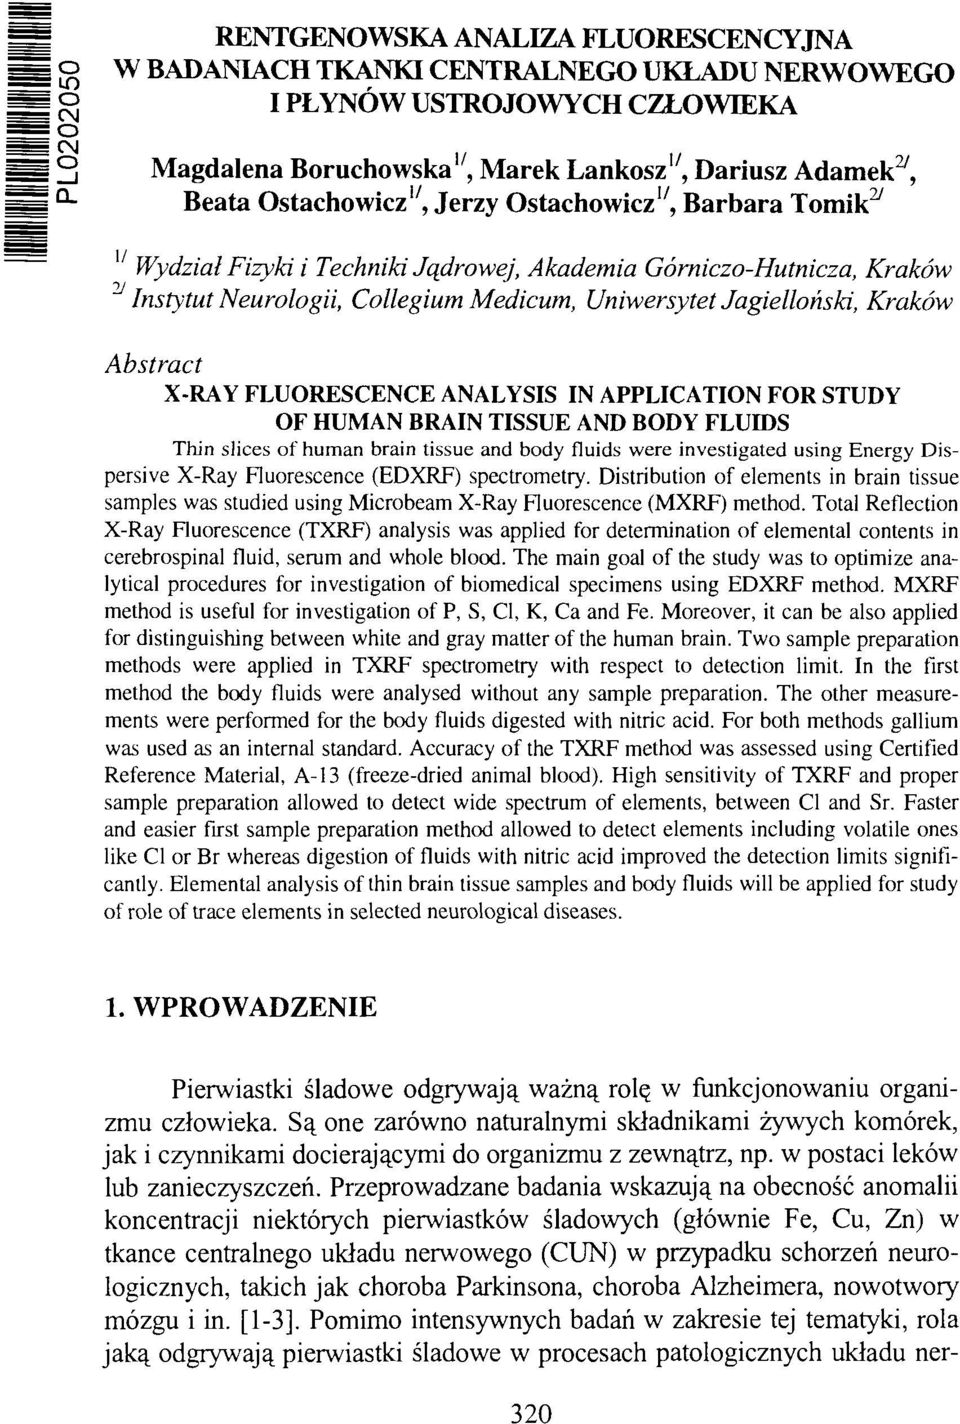 Kraków Abstract X-RAY FLUORESCENCE ANALYSIS IN APPLICATION FOR STUDY OF HUMAN BRAIN TISSUE AND BODY FLUIDS Thin slices of human brain tissue and body fluids were investigated using Energy Dispersive